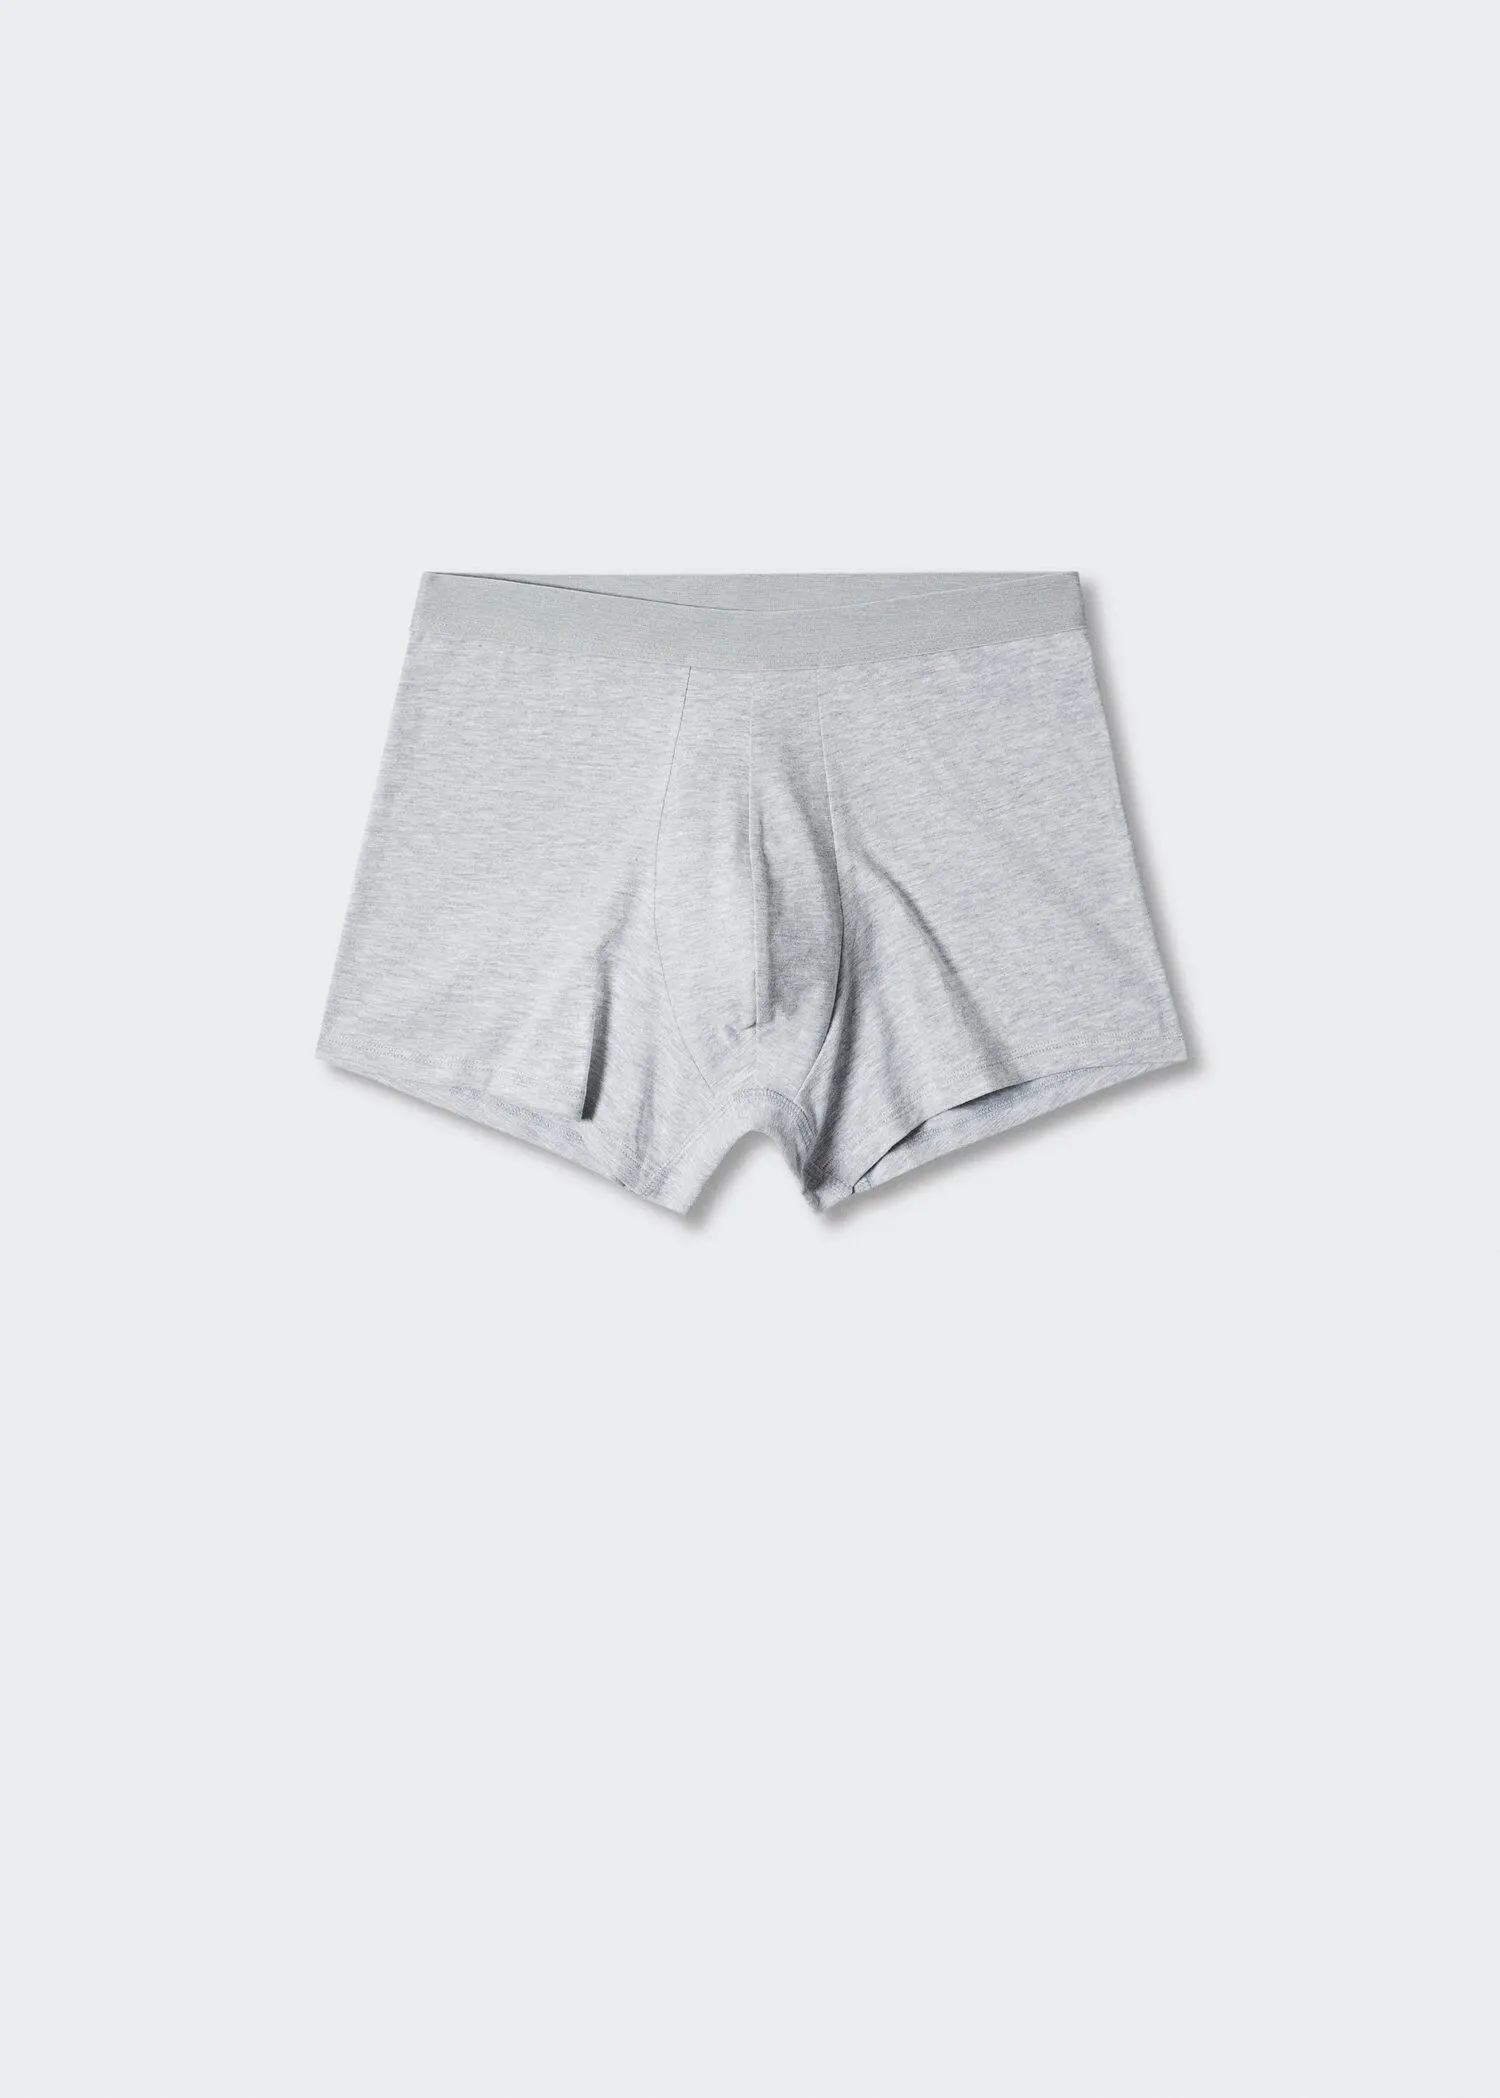 Mango 3-pack cotton boxers. a pair of gray shorts with a pocket on the side. 